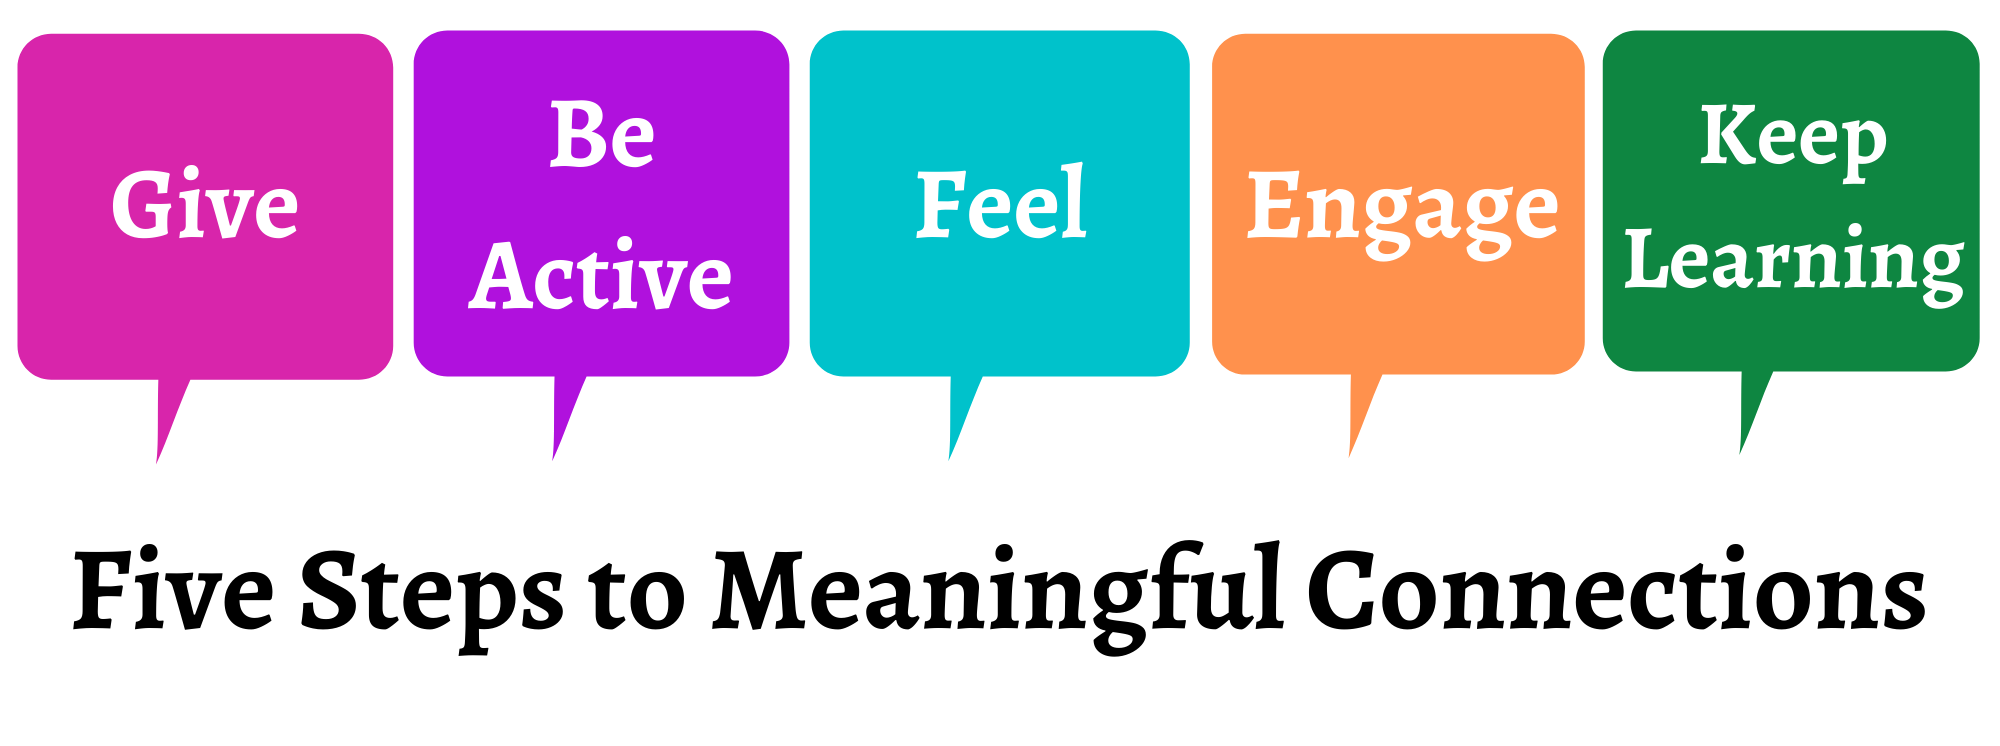 Five Steps to Meaningful Connections.png